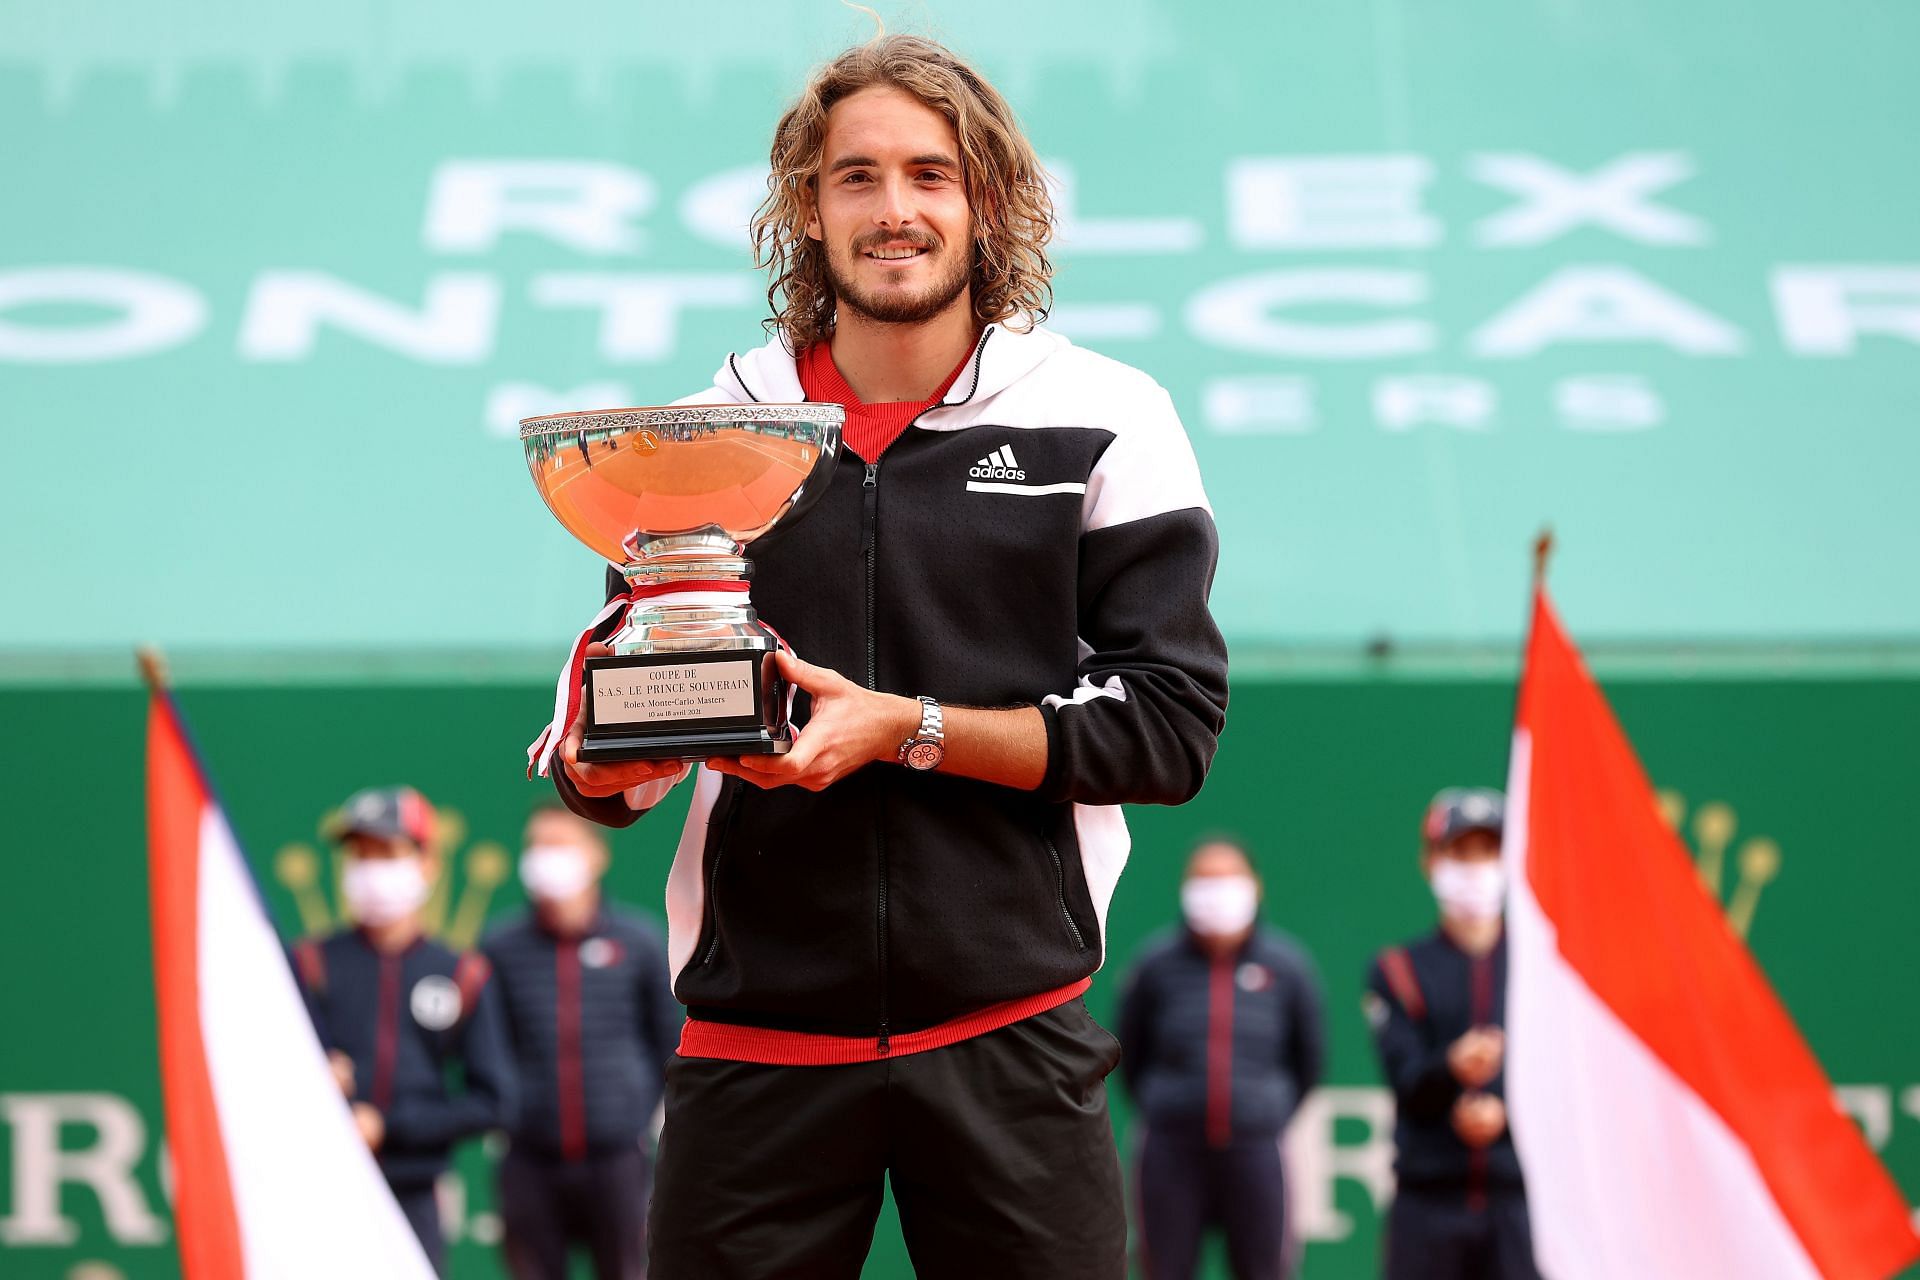 Stefanos Tsitsipas at the 2021 Rolex Monte-Carlo Masters.